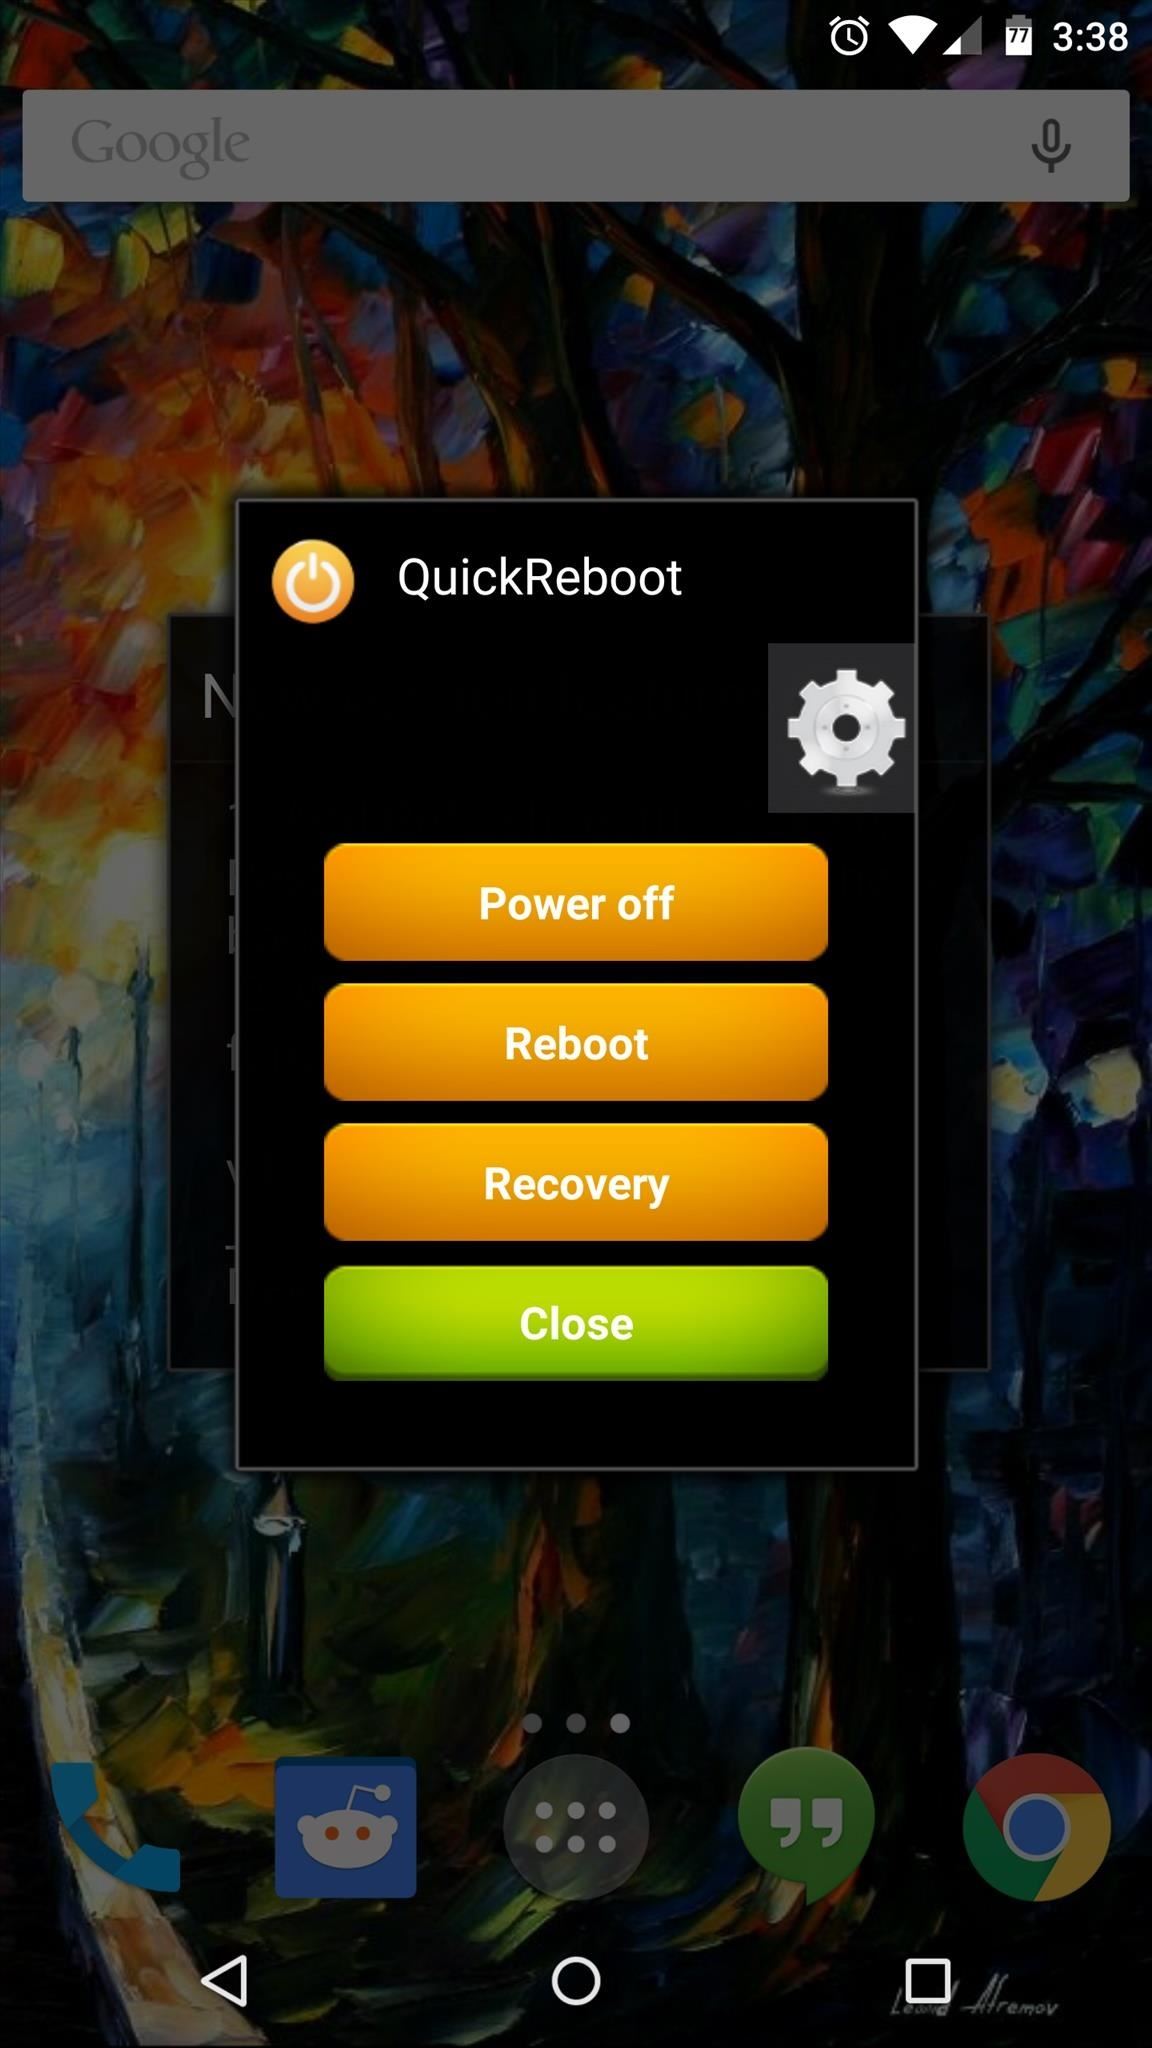 Add a Full "Reboot" Menu to Android 5.0 Lollipop